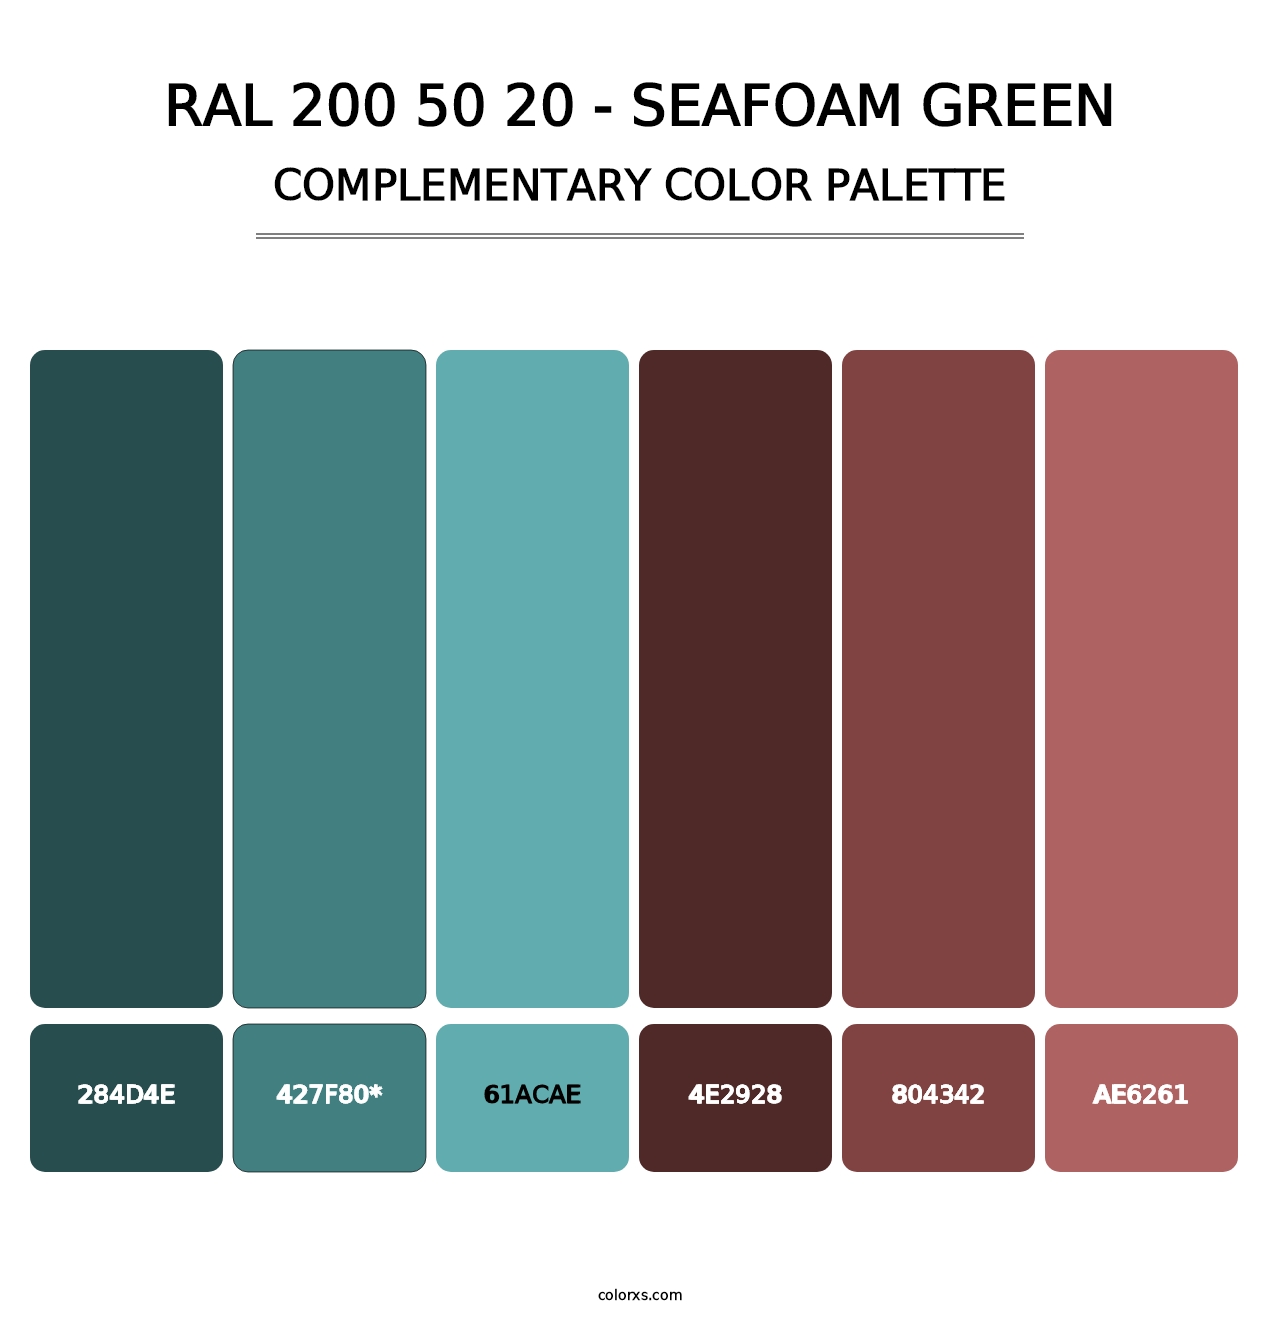 RAL 200 50 20 - Seafoam Green - Complementary Color Palette